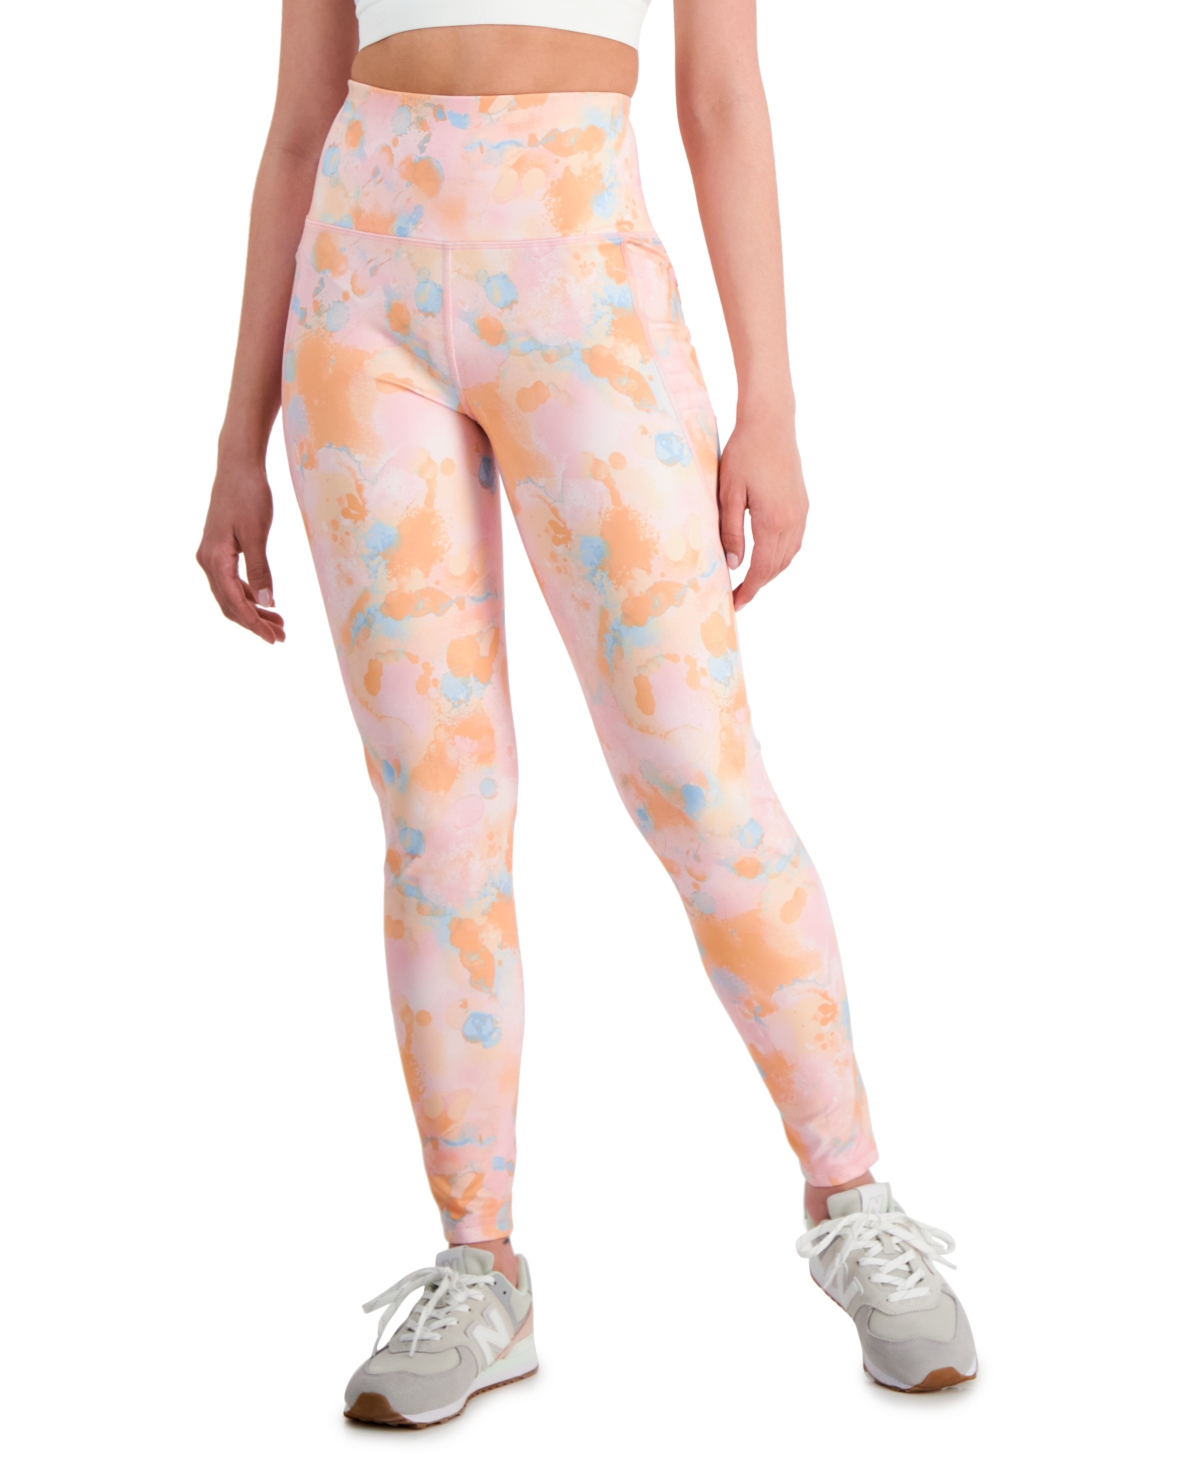 Women's Printed 7/8 Compression Leggings, Created for Macy's - Pink Icing